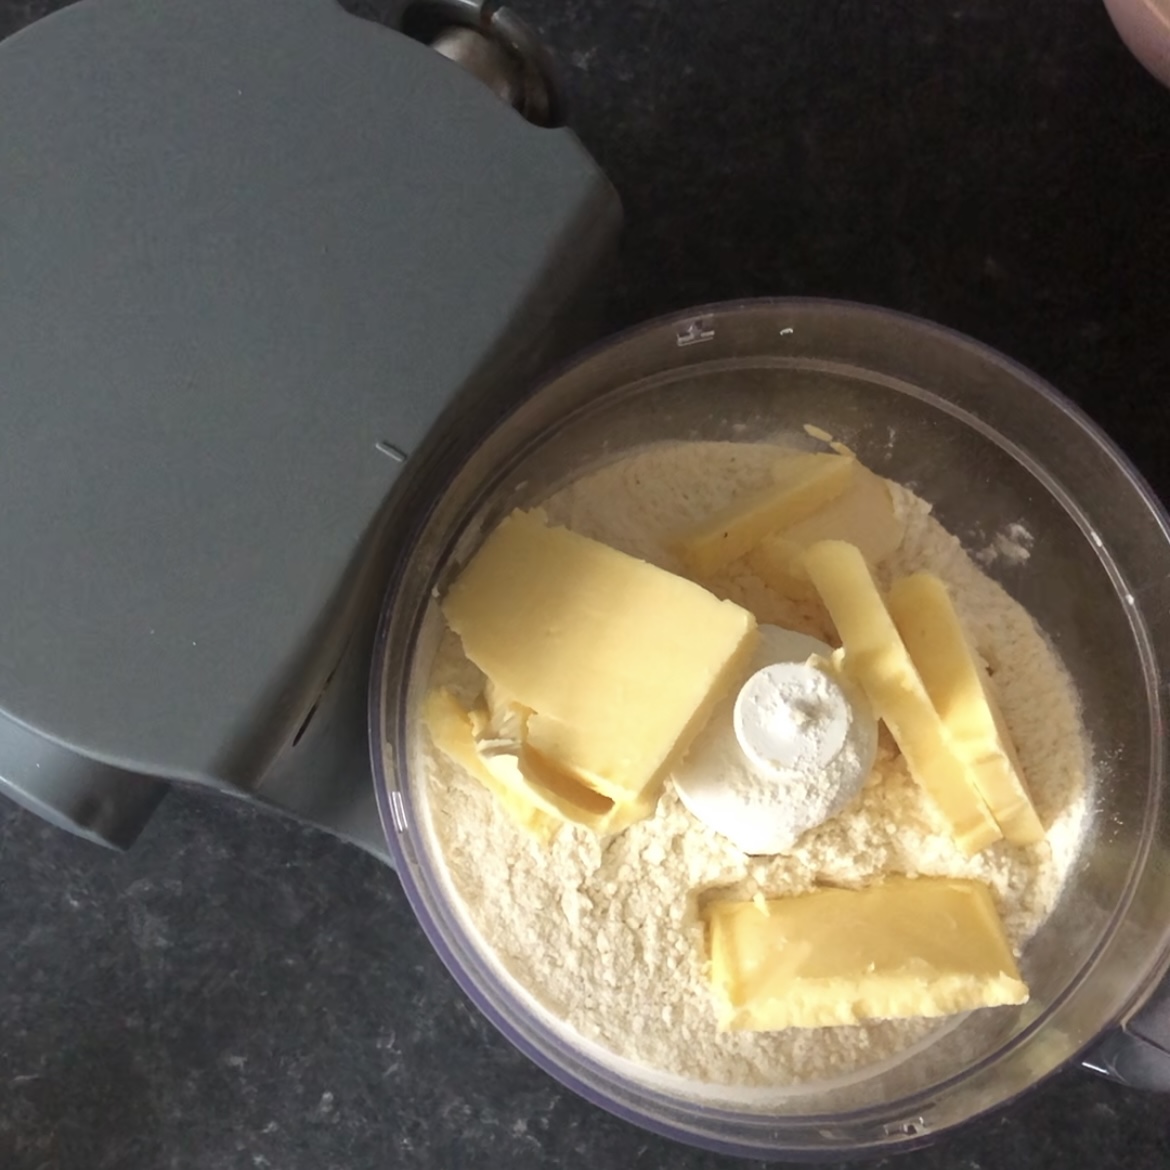 Flour and butter in a food processor